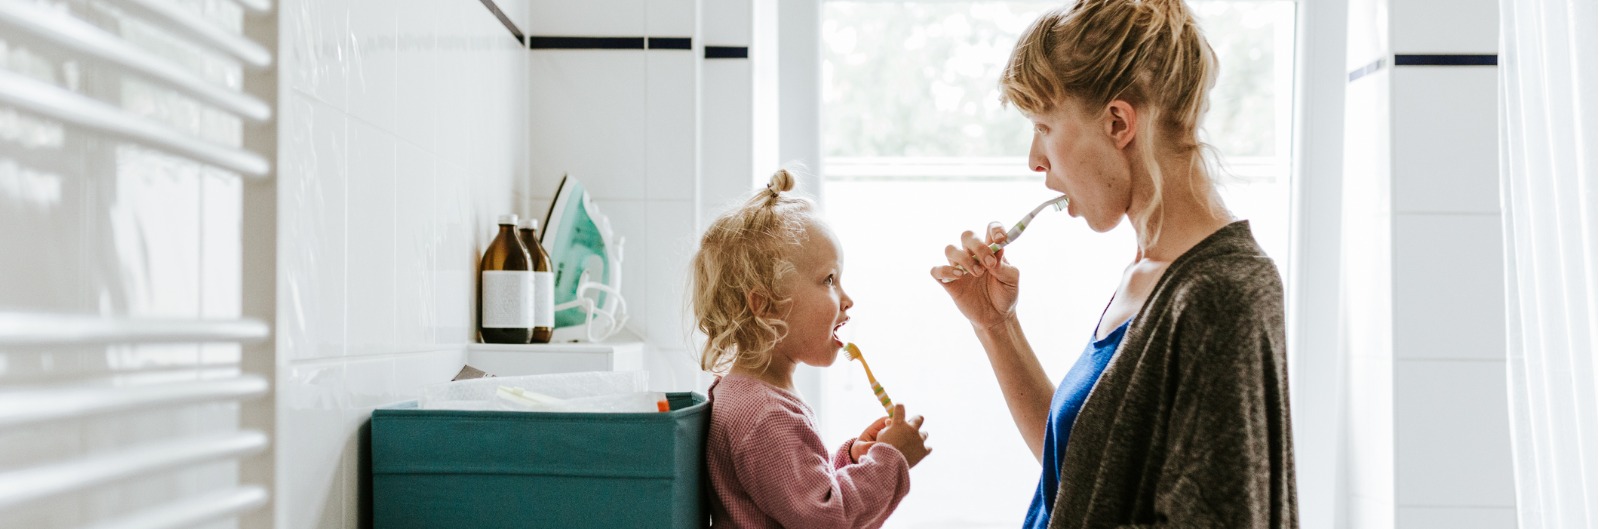 young-mother-with-a-child-brushing-teeth-in-the-morning-picture-1600x529.jpg